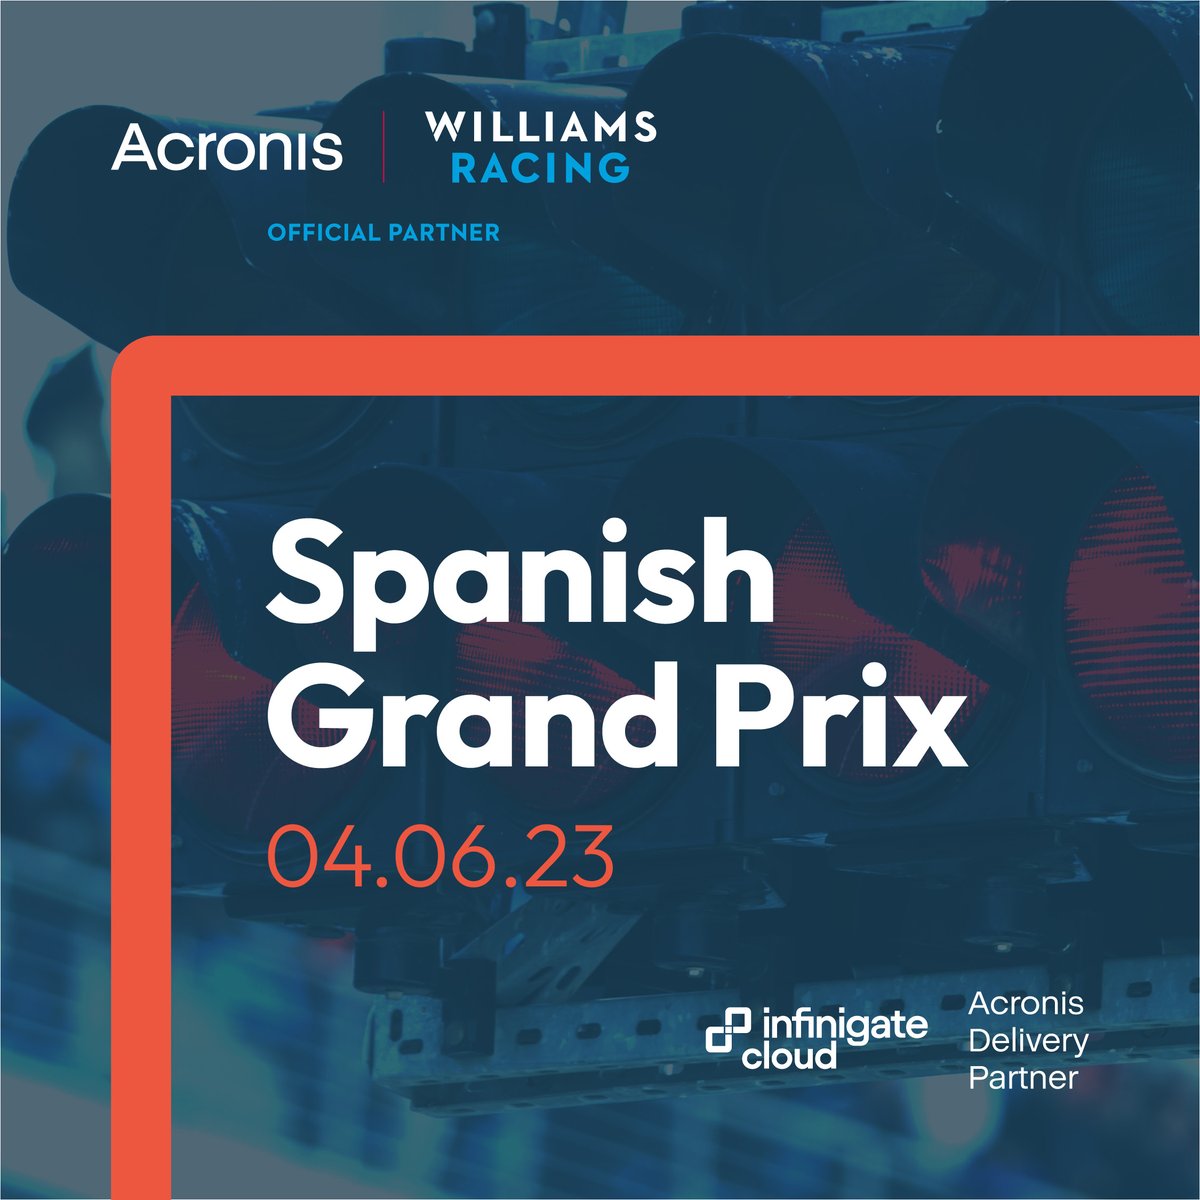 Are you ready for the passion and power of the Spanish Grand Prix on the 4th June? We certainly are! Good luck to everyone involved at Williams Racing. 

@InfinigateCloud are the Official @Acronis #CyberFit Delivery Partner in line with their partnership with @WilliamsRacing.